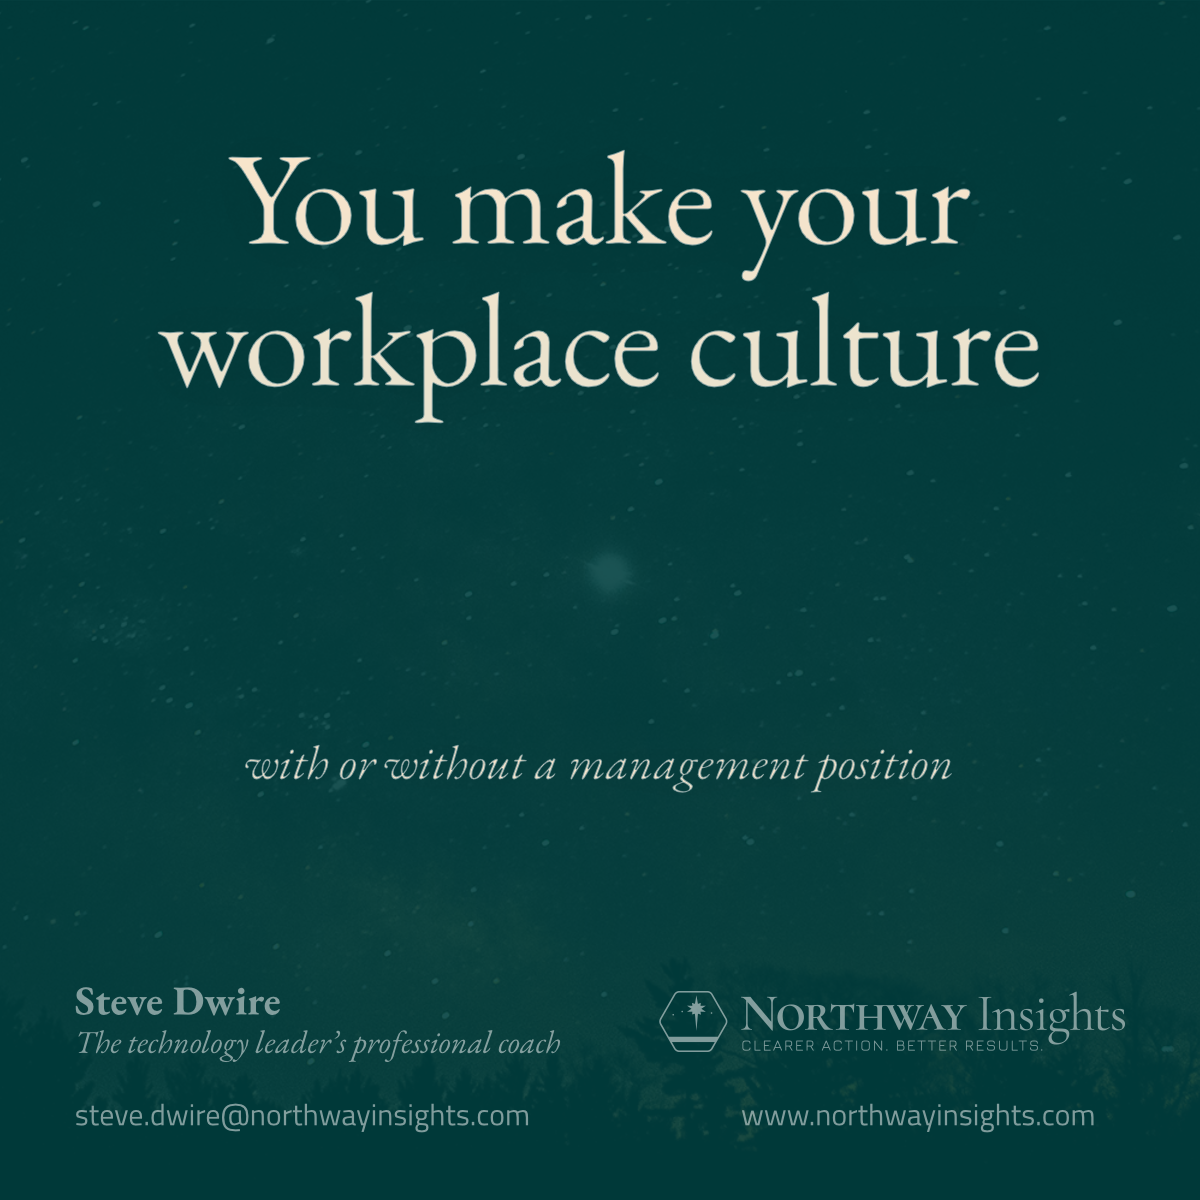 You make your workplace culture (with or without a management position)